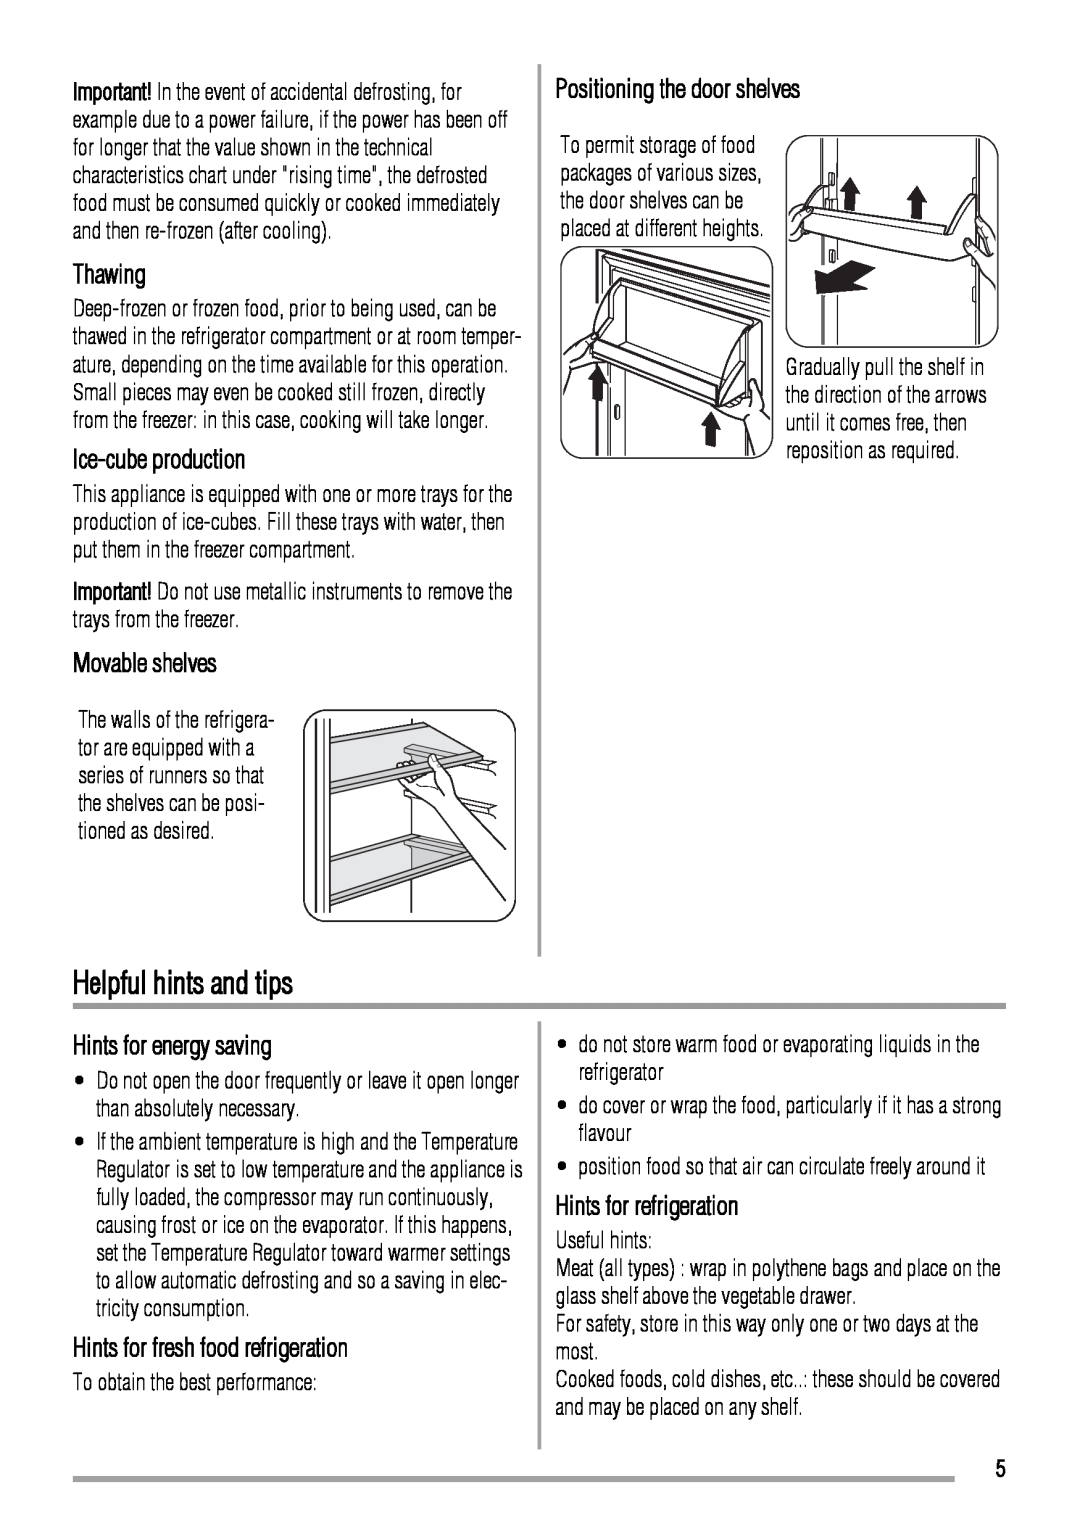 Zanussi ZBB6284 Helpful hints and tips, Thawing, Ice-cube production, Movable shelves, Positioning the door shelves 